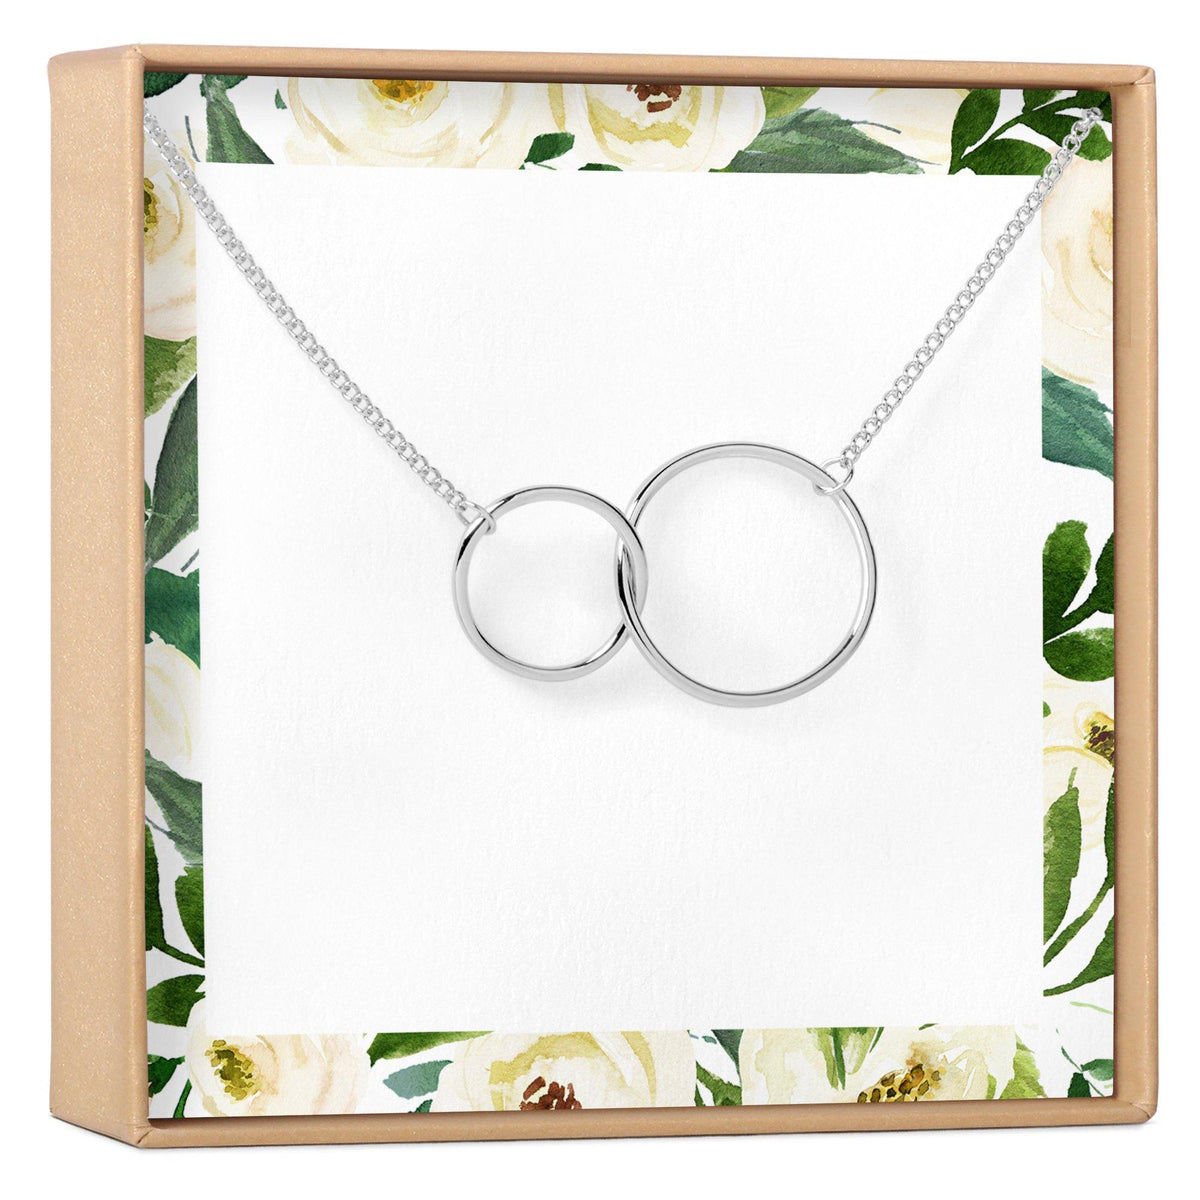 Two Interlocking Circles Necklace - Dear Ava, Jewelry / Necklaces / Pendants